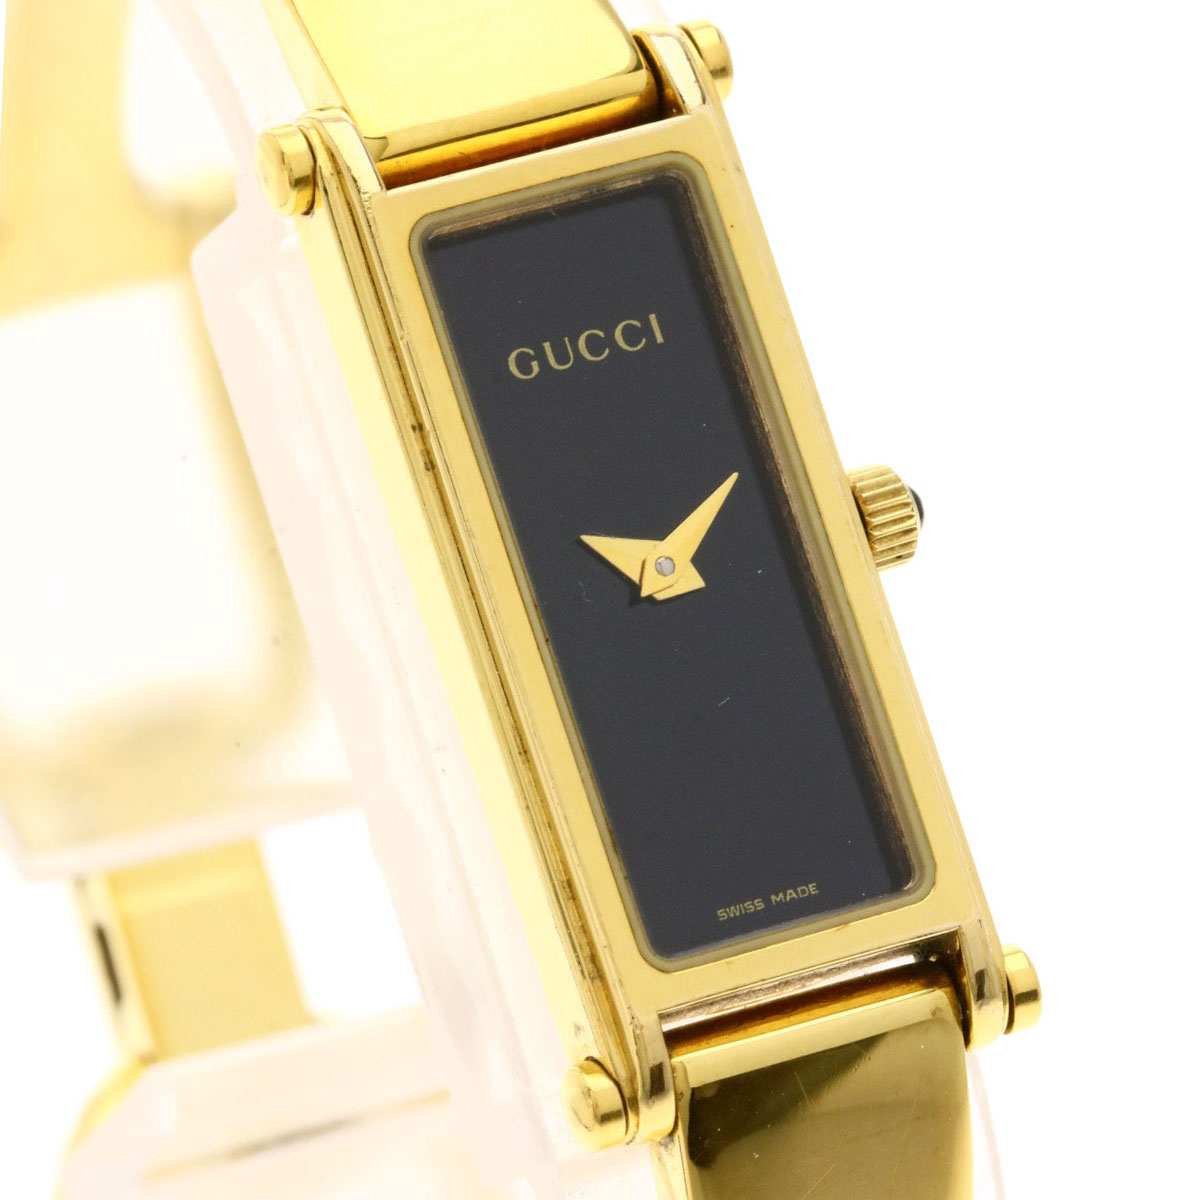 GUCCI Bangle Watches 1500L Gold Plated/Gold Plated Ladies | eBay